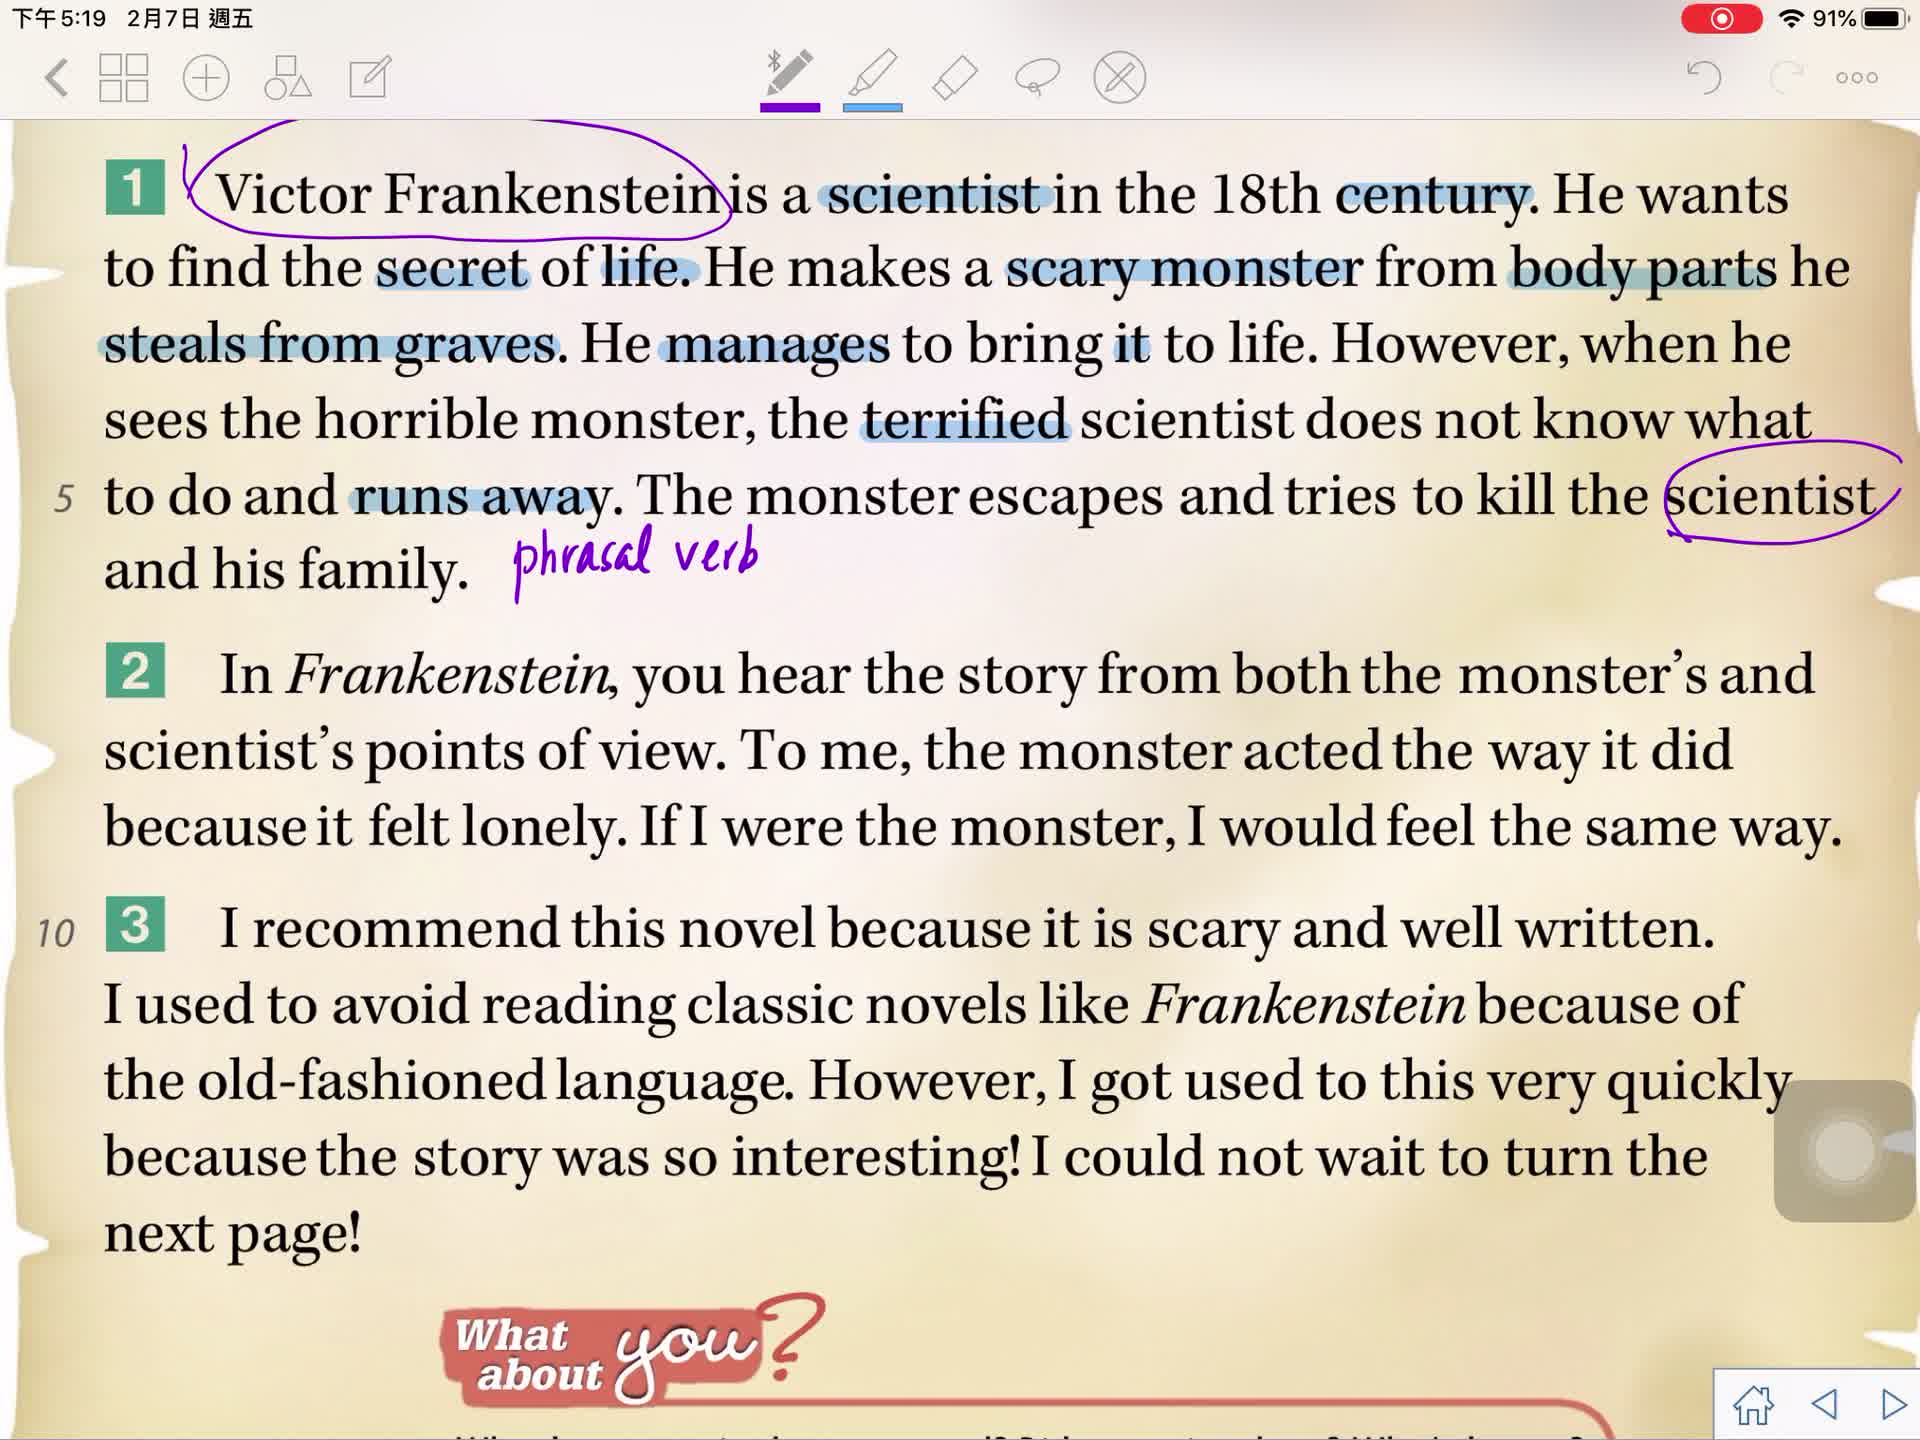 LT_S2_NTP U7 p.68 Text 1 A review of Mary Shelley's Frankenstein